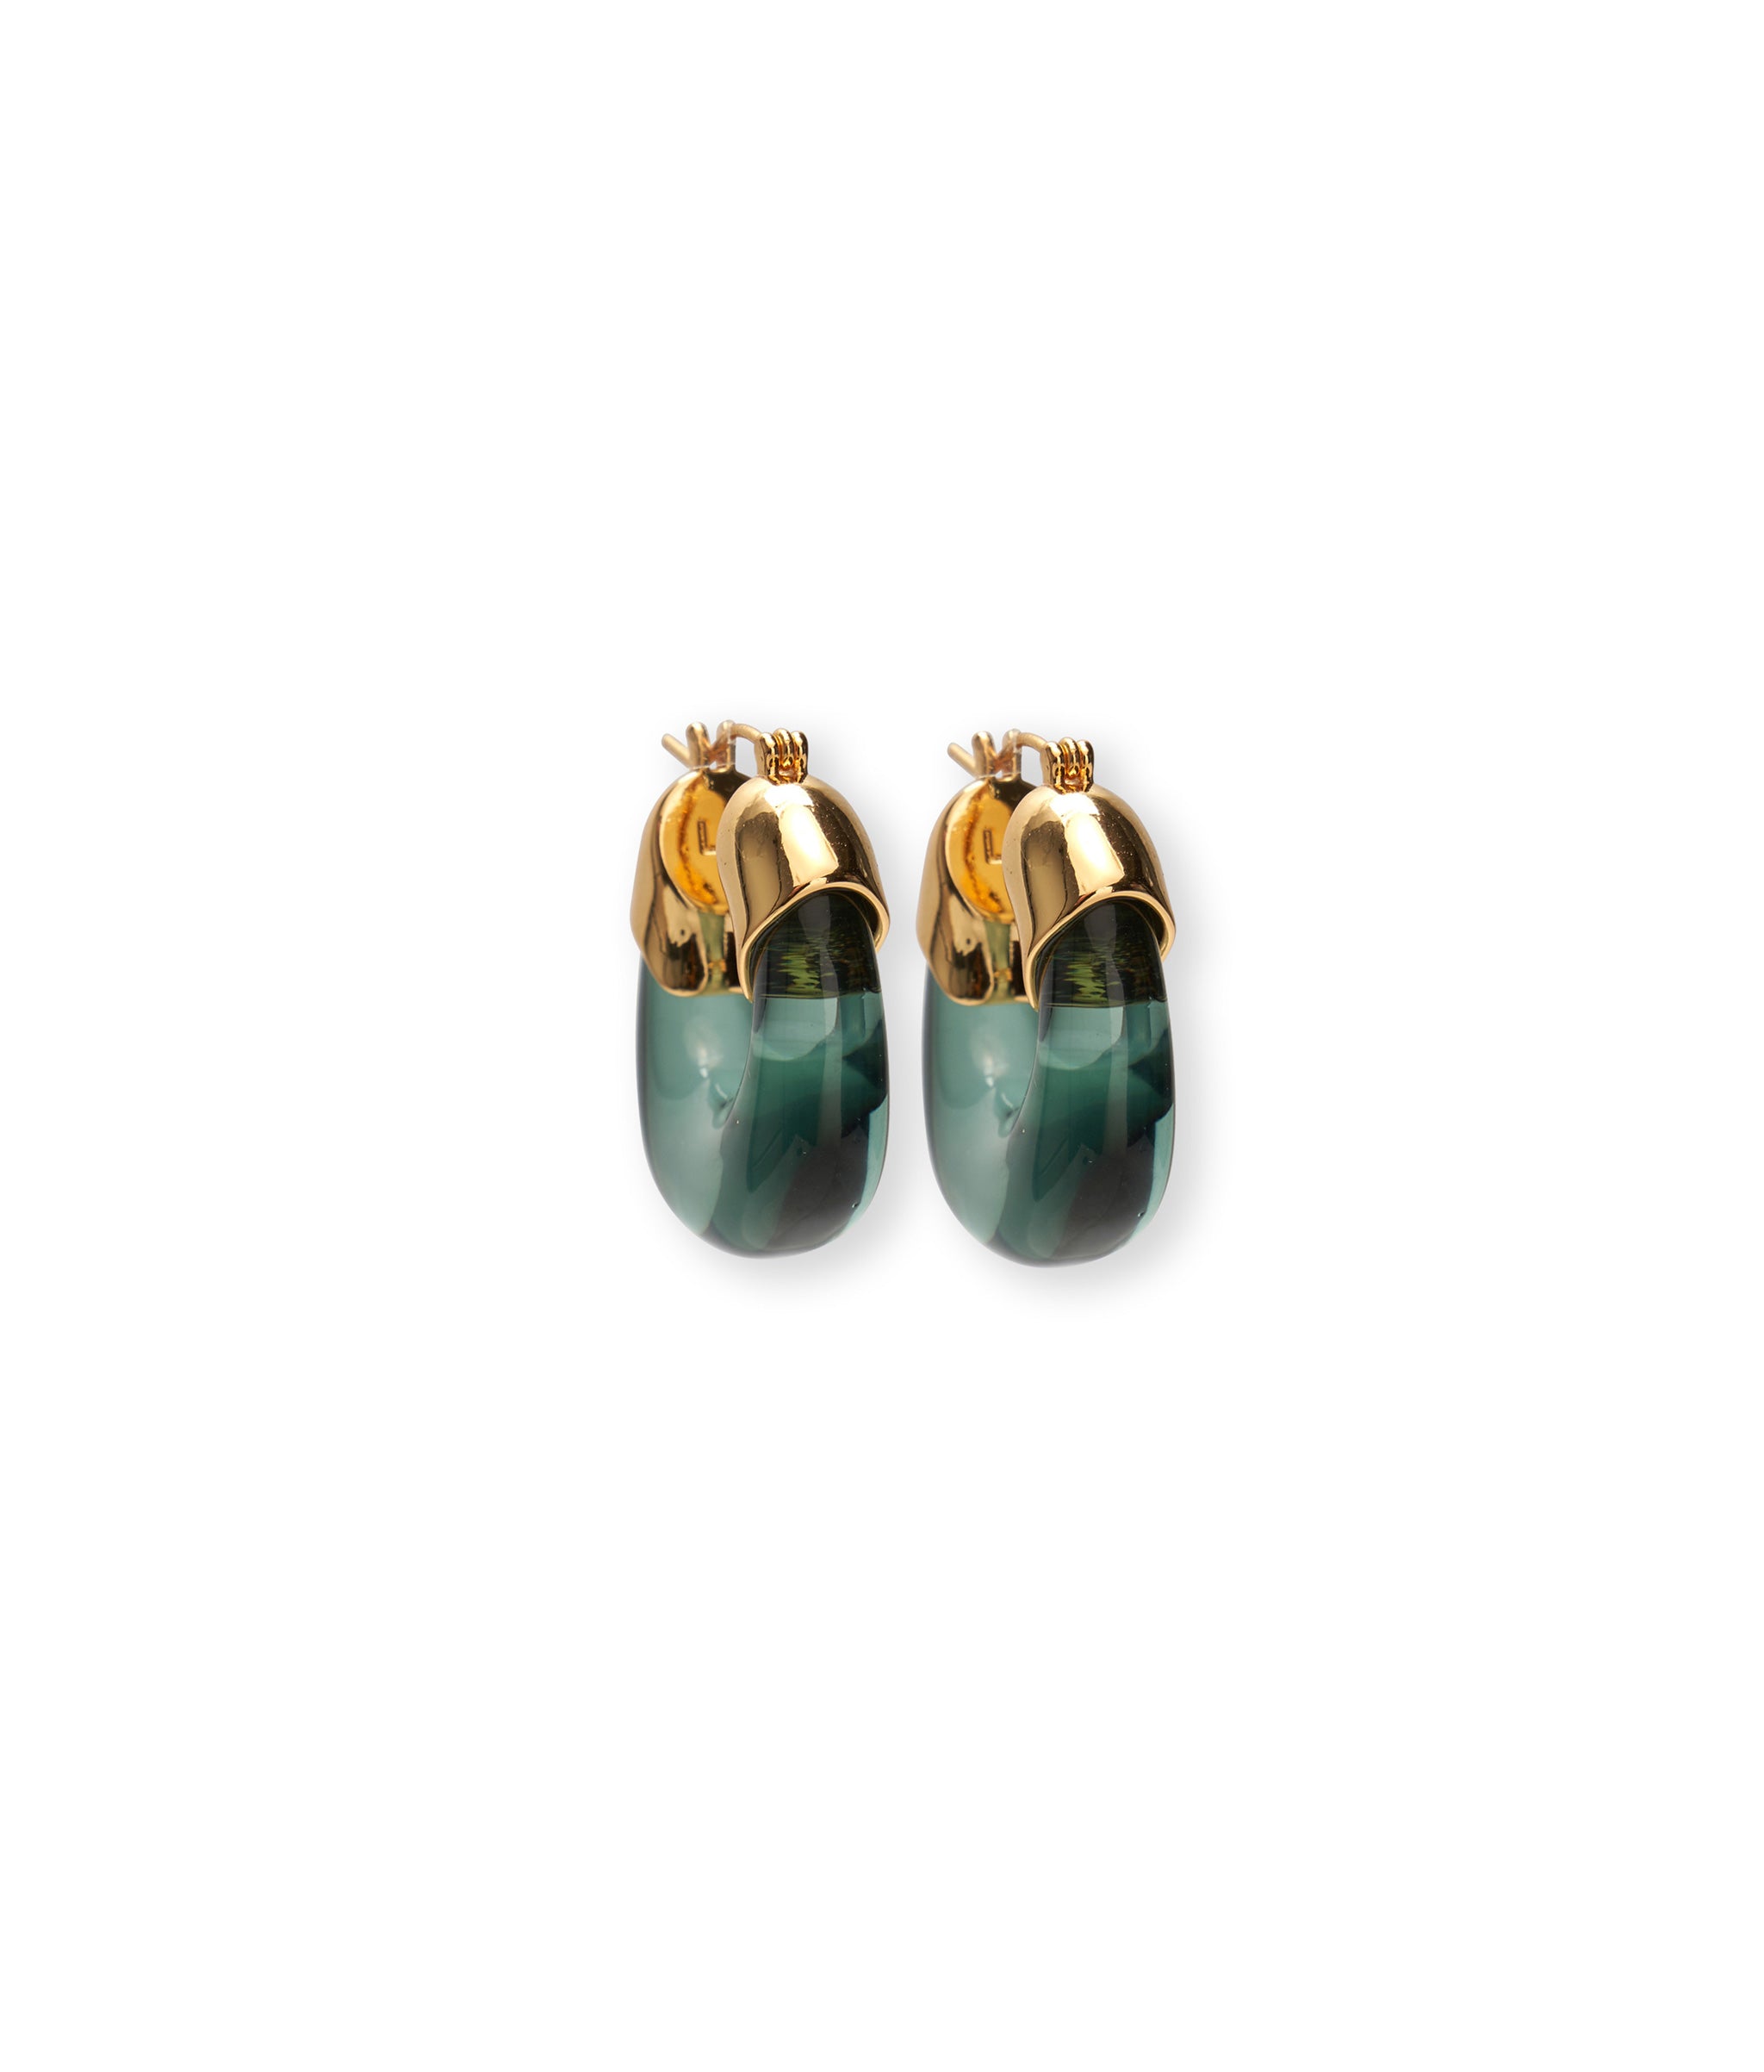 Mini Organic Hoops in Aqua. Hoop earrings with gold-plated brass and forest green-colored resin.